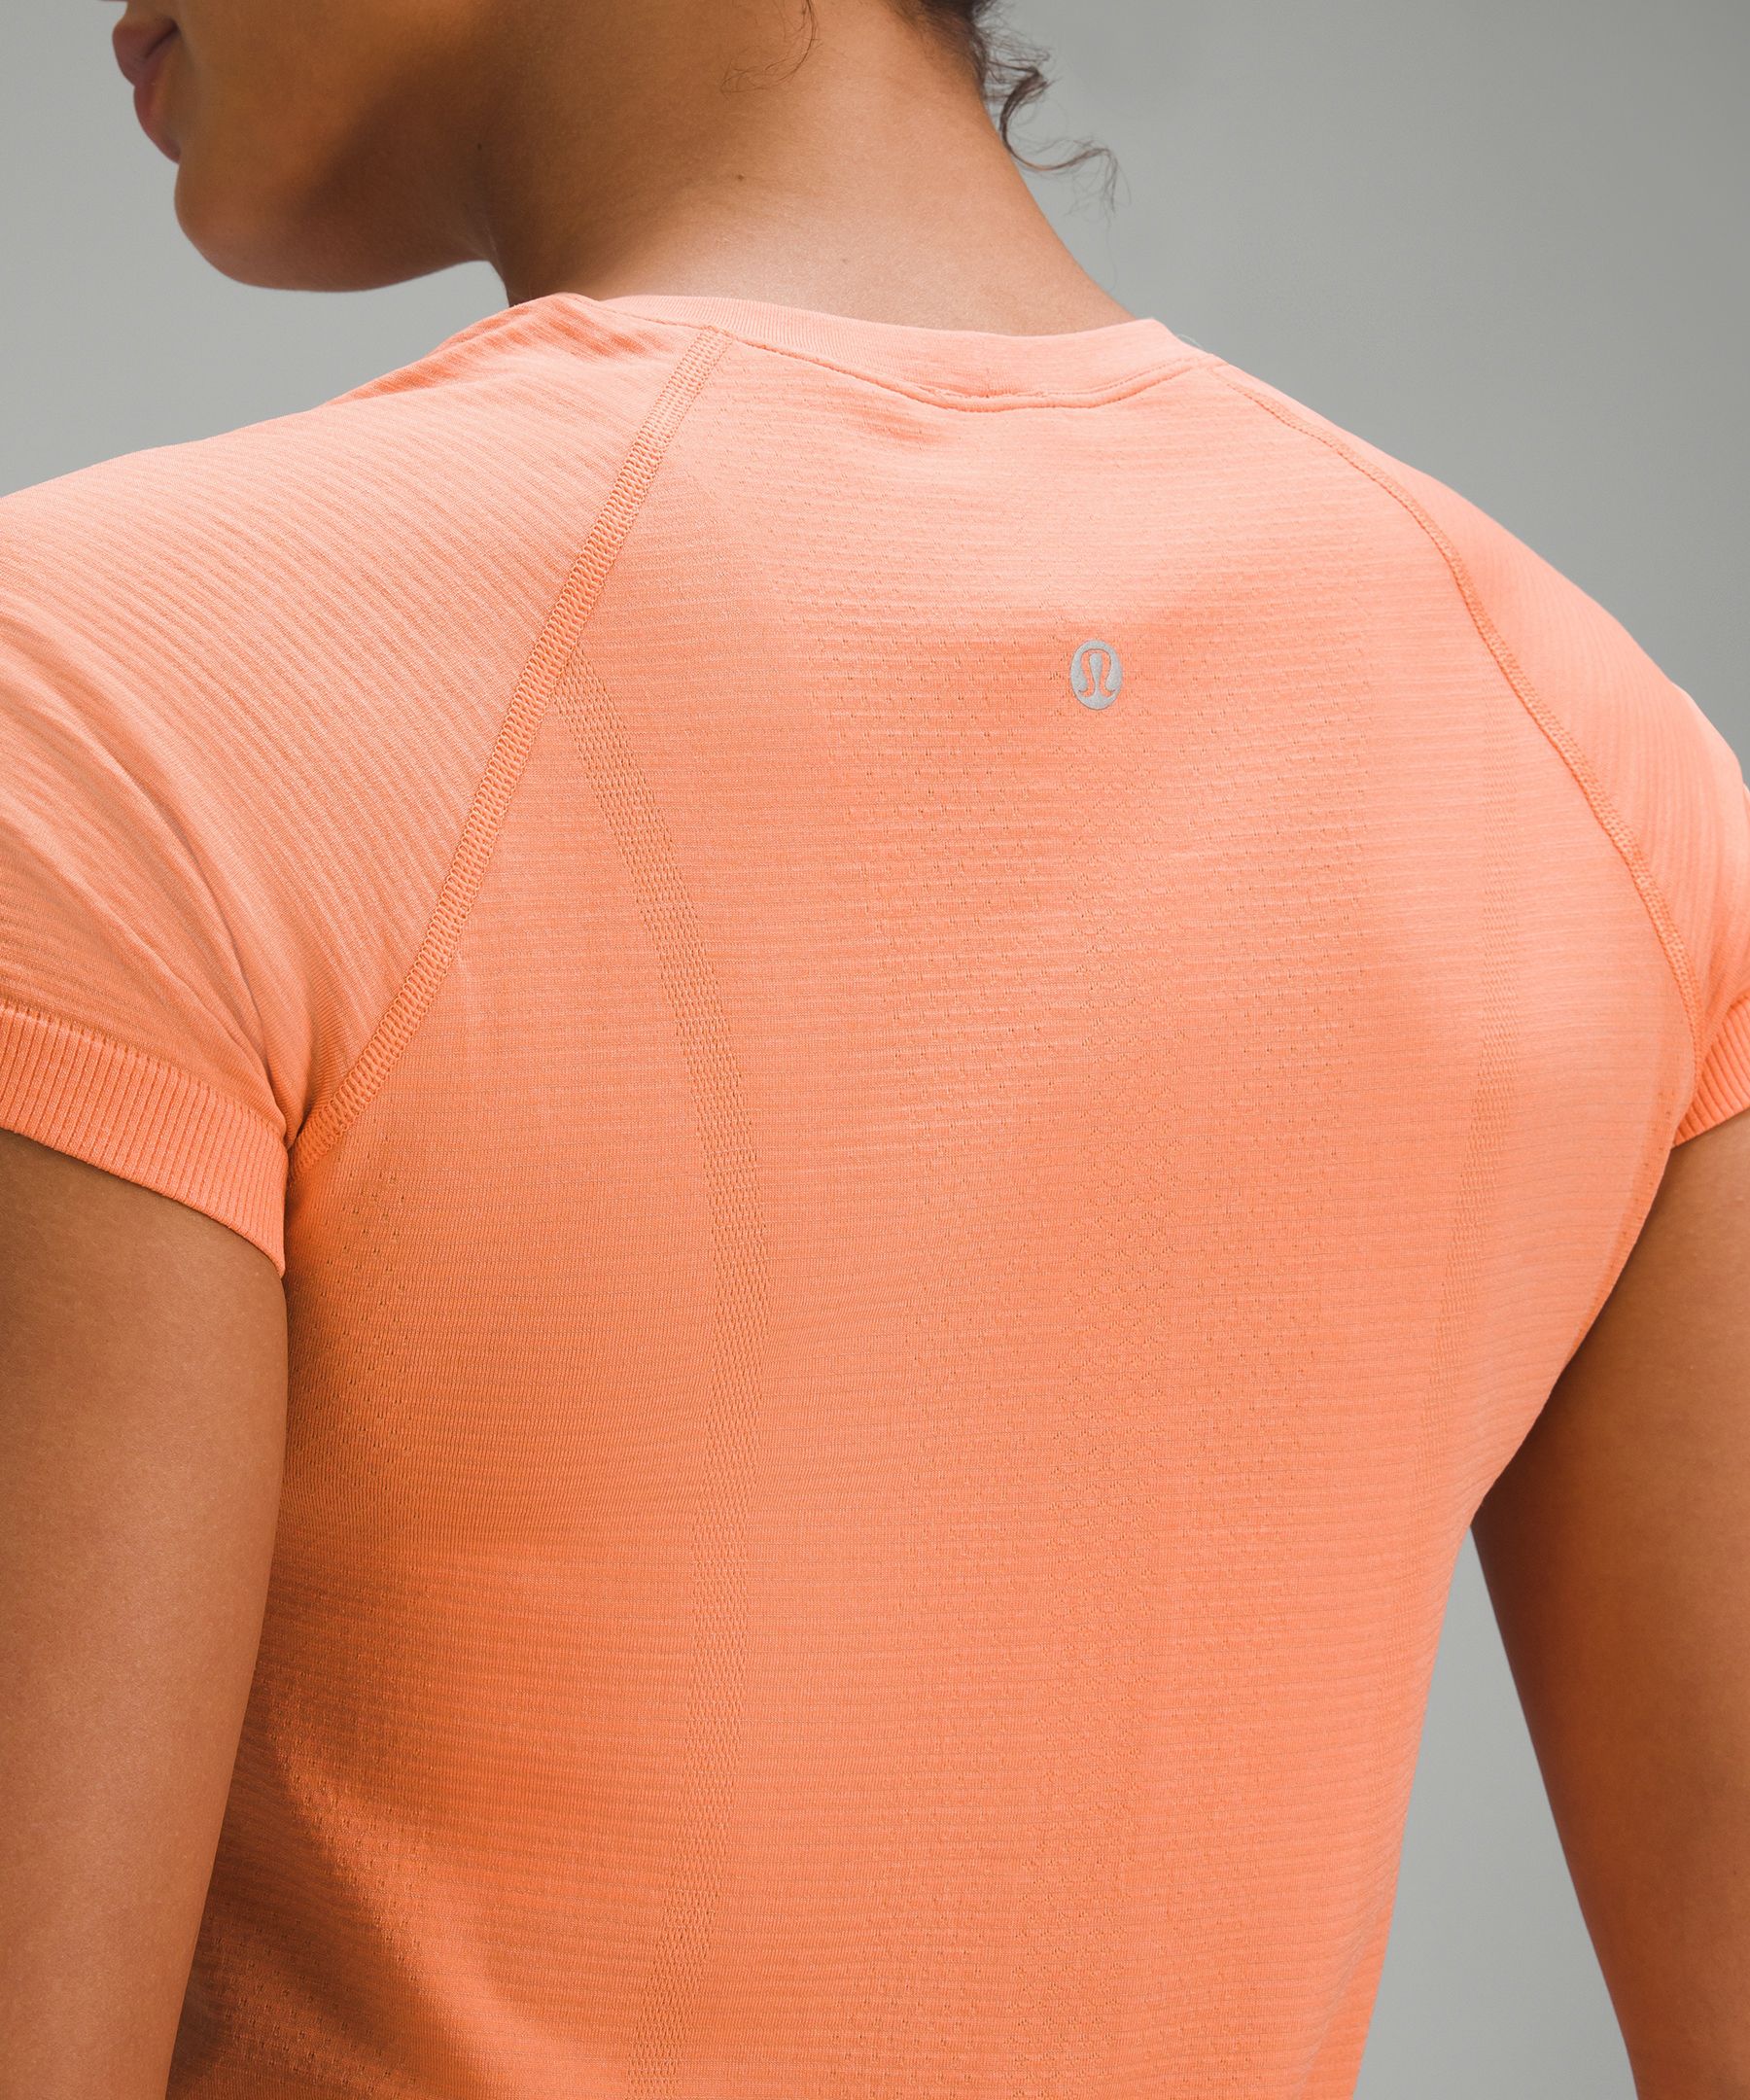 Lululemon Swiftly Tech Short Sleeve Top in Peach — UFO No More